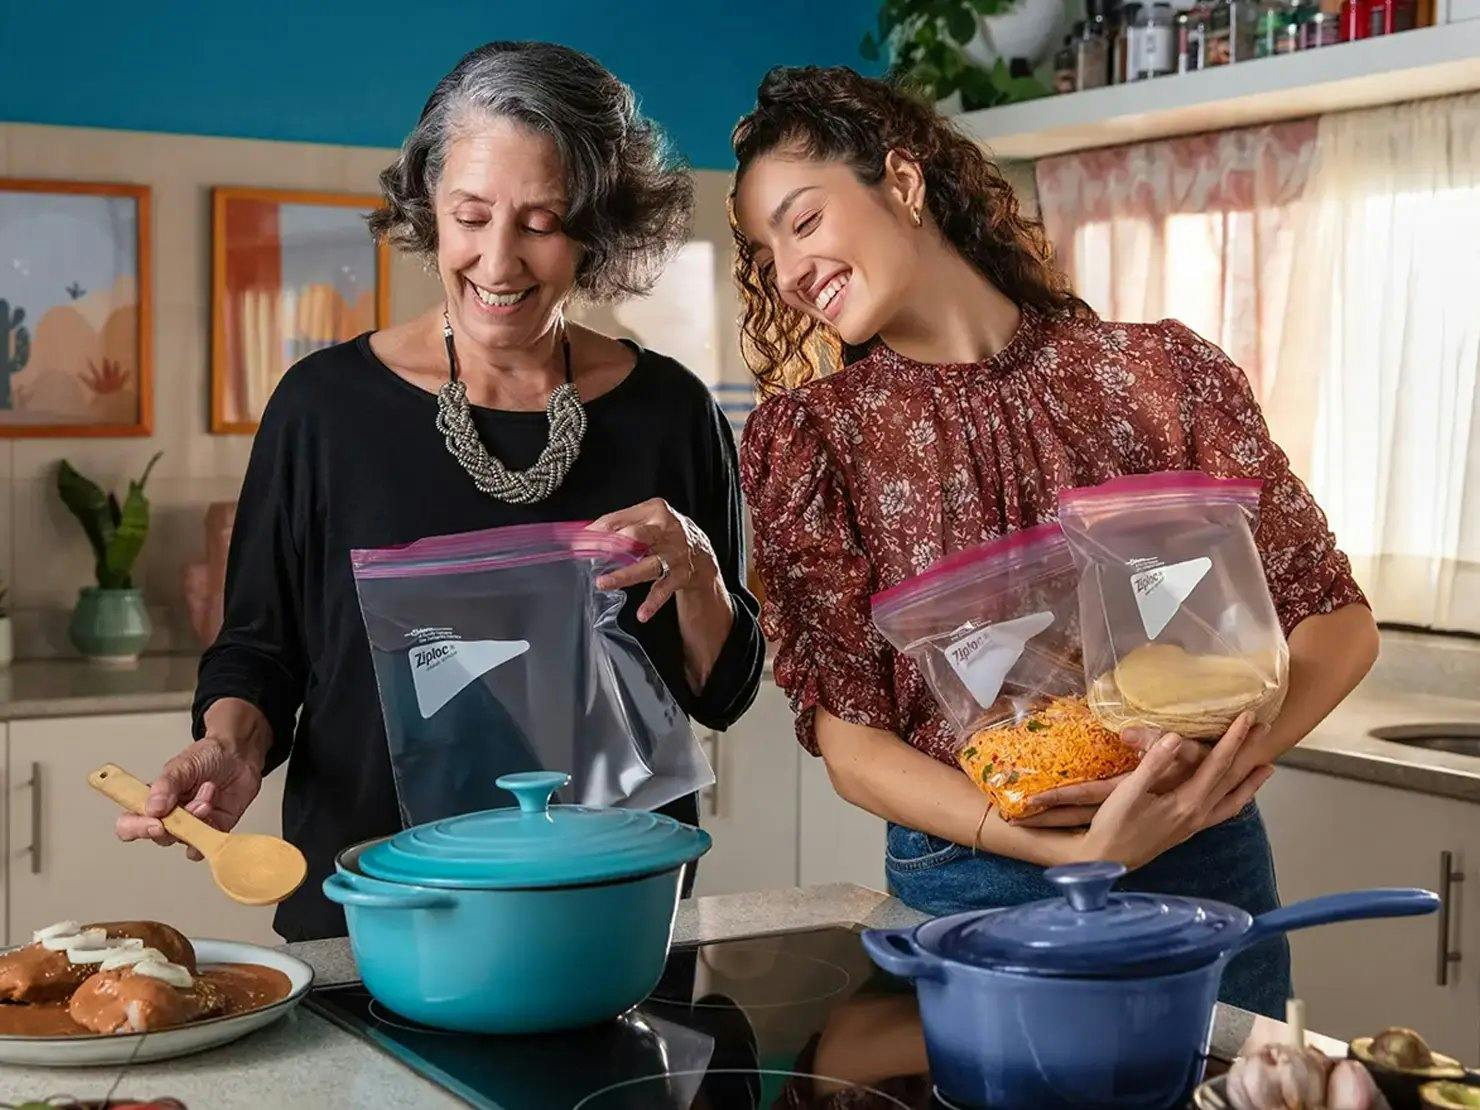 Two women cooking and holding ingredients in Ziploc bags